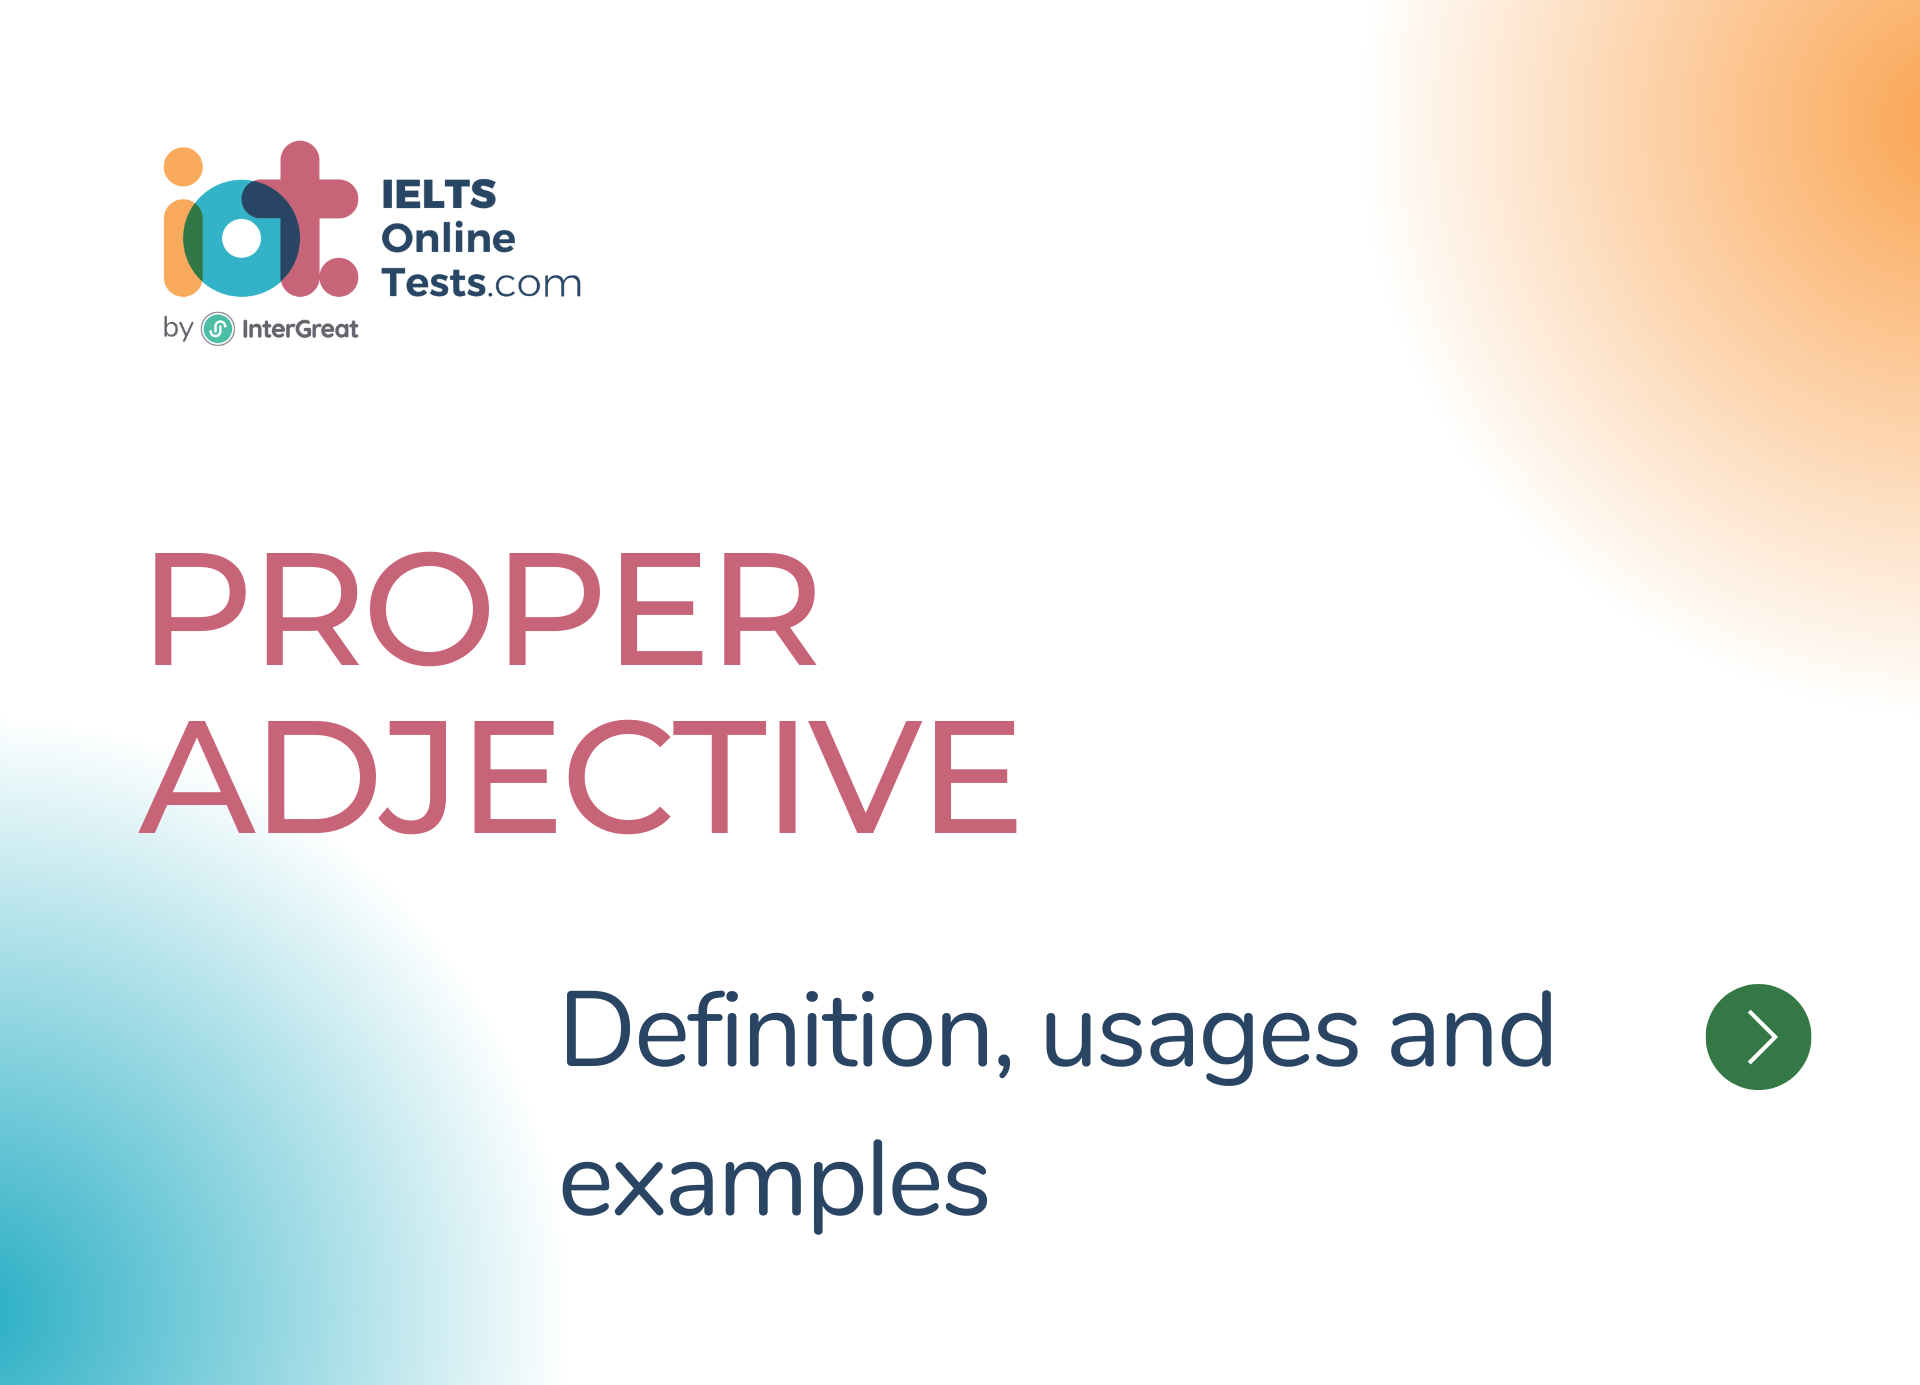 Proper Adjective definition, usages and examples